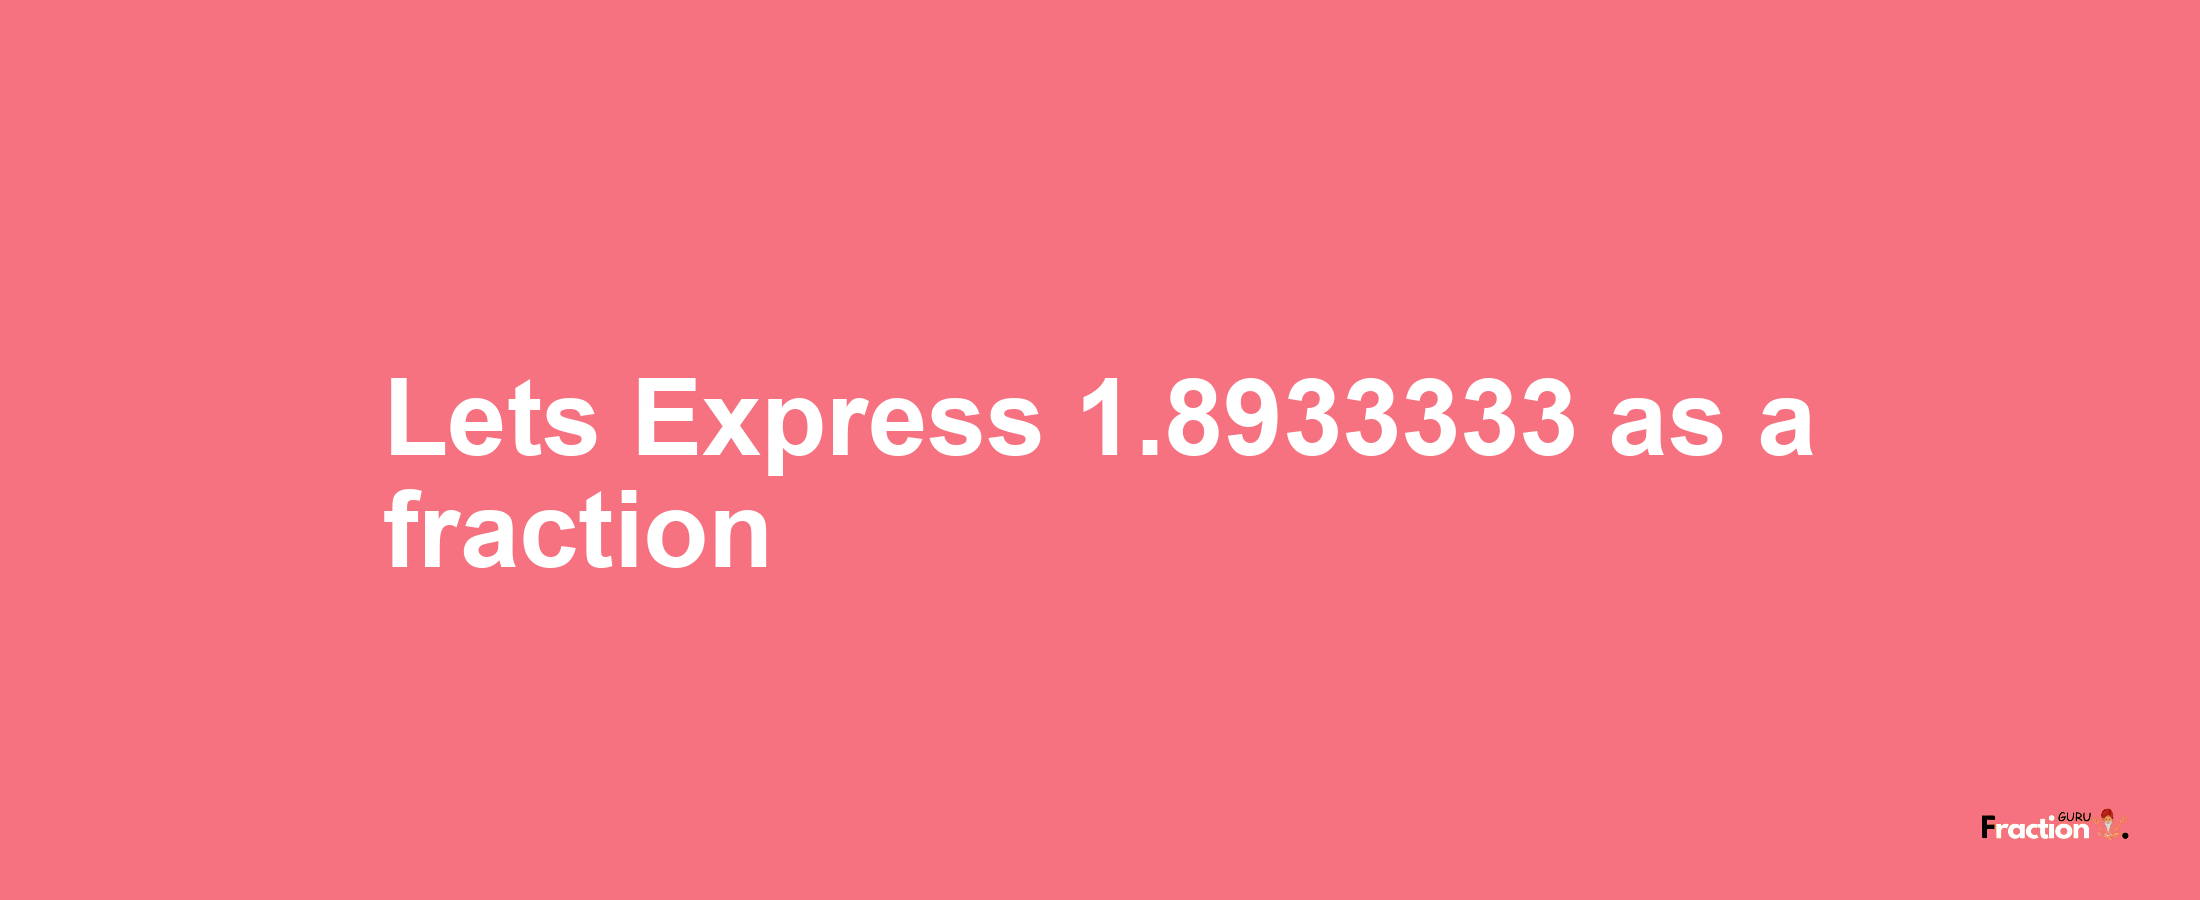 Lets Express 1.8933333 as afraction